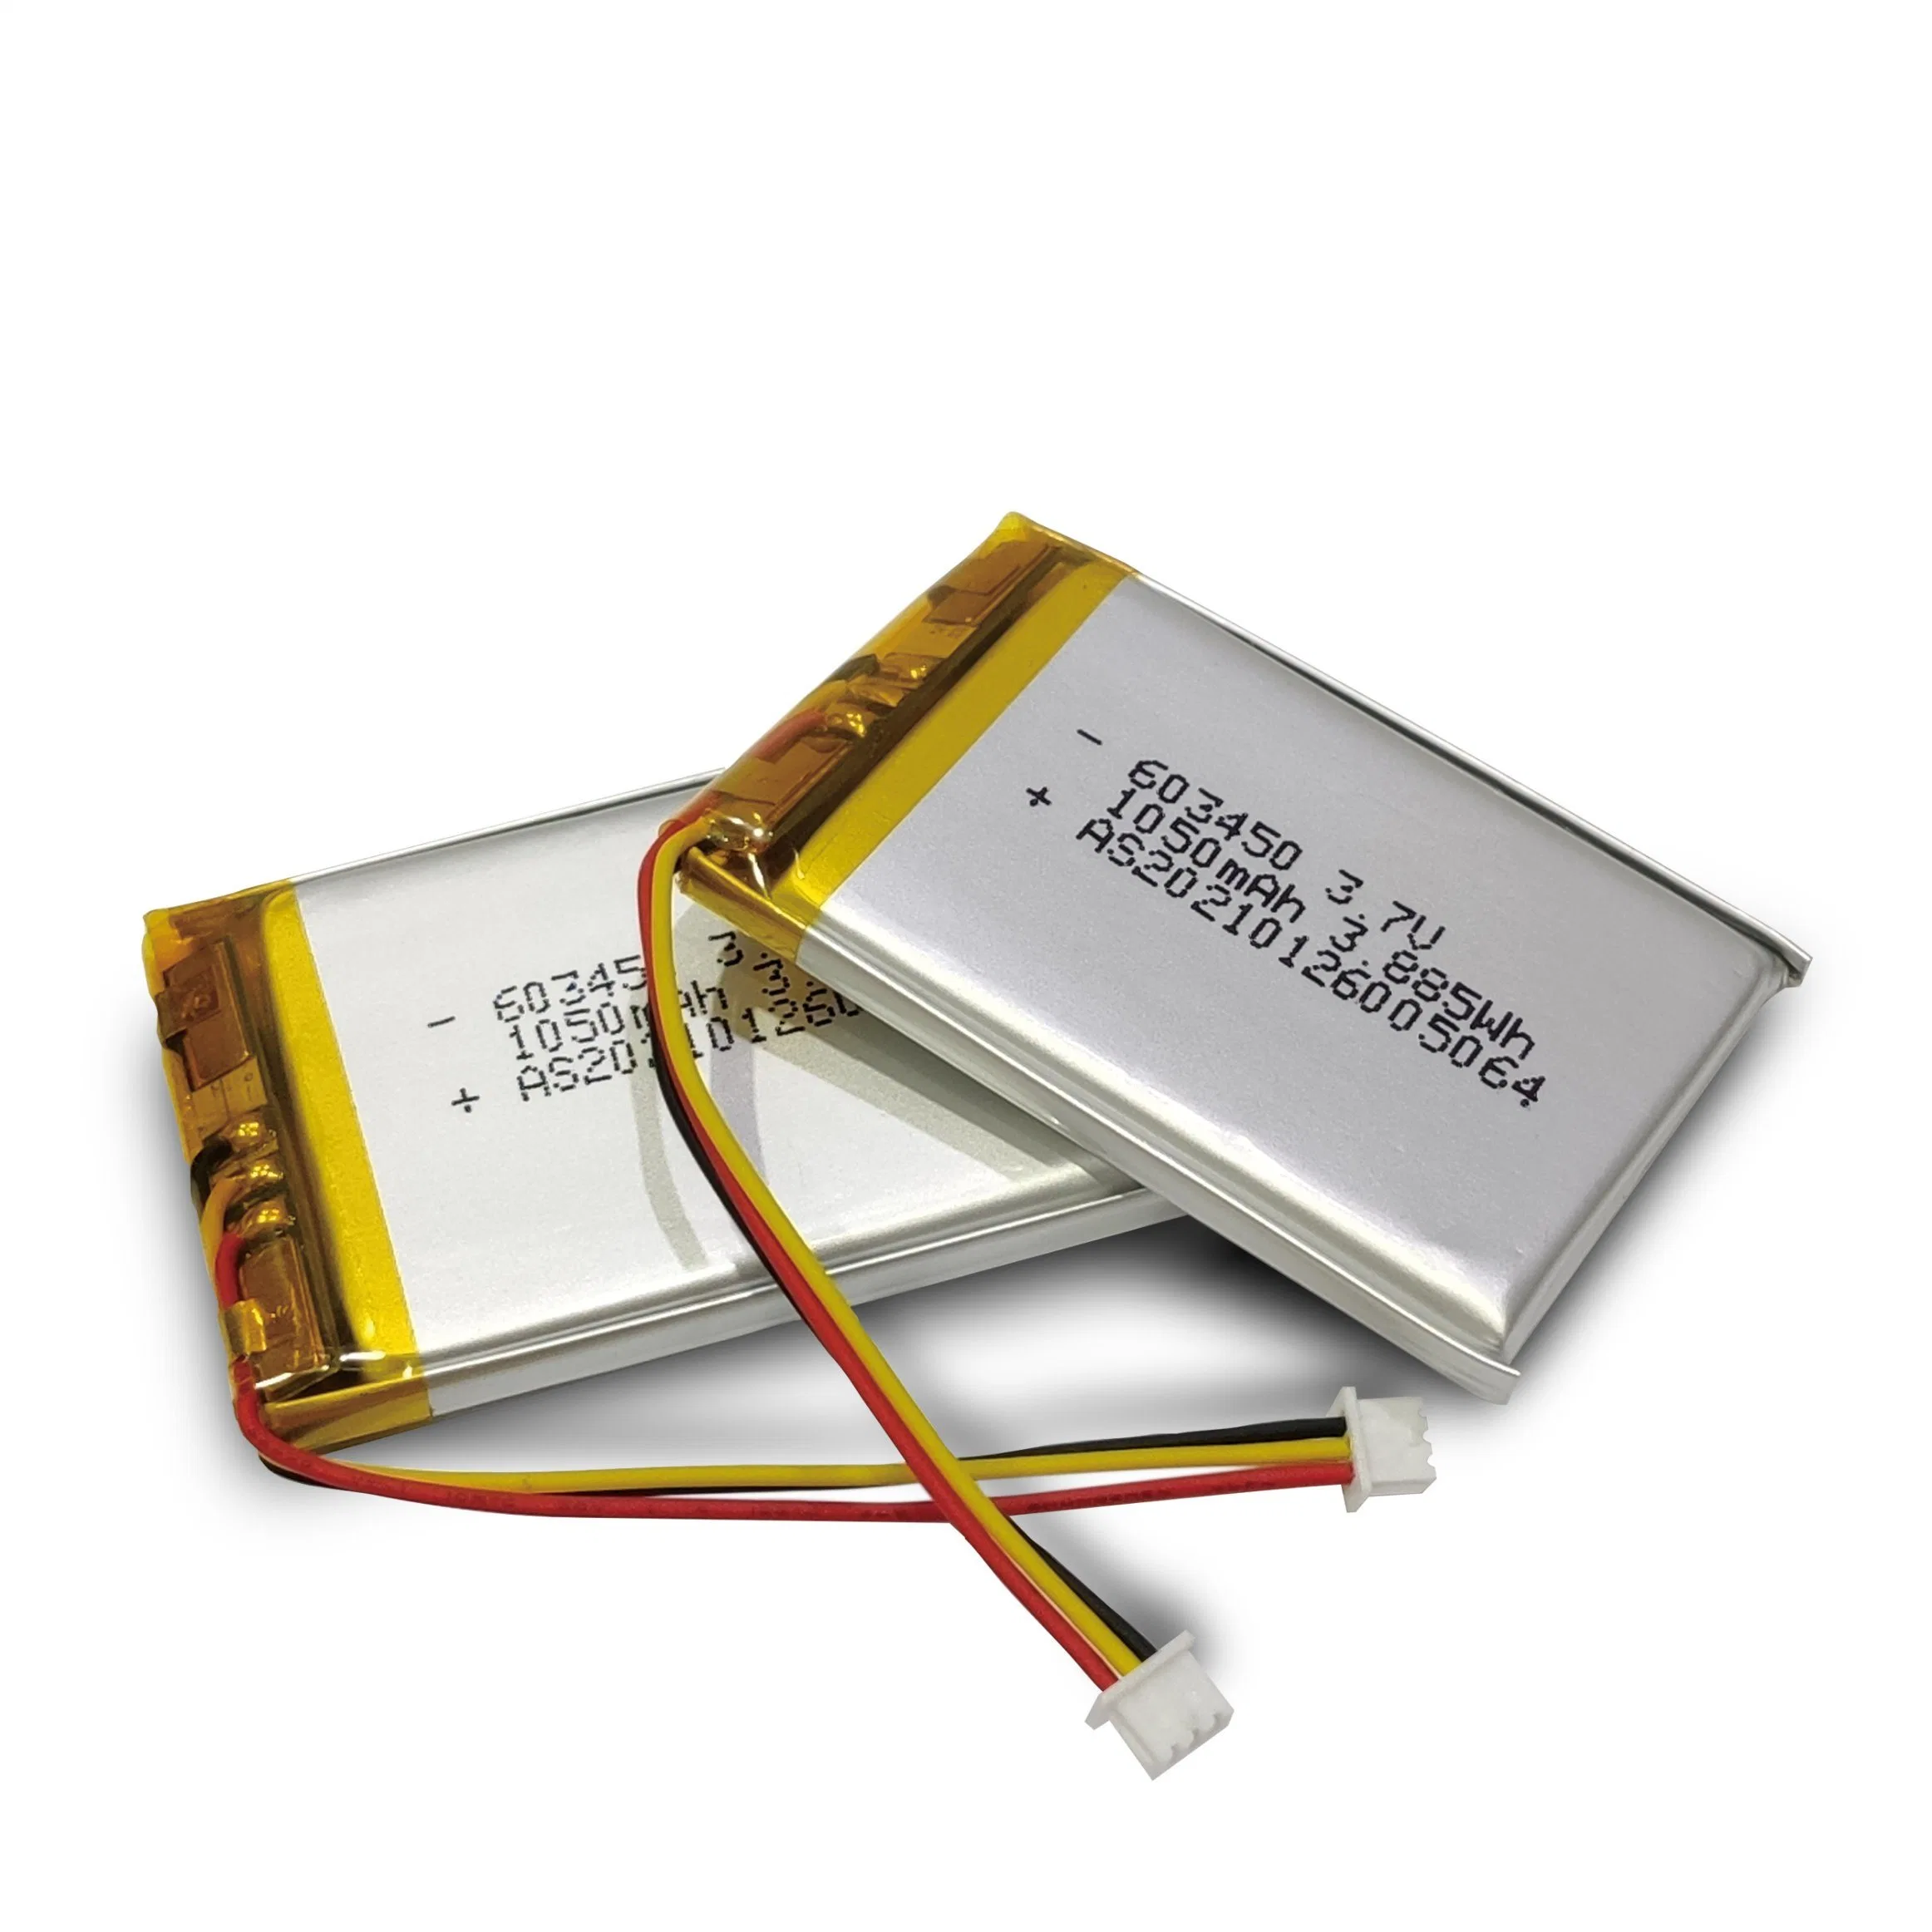 Rechargeable Small Battery 603450 Lithium Polymer Battery 3.7V 1050mAh Lipo Cell